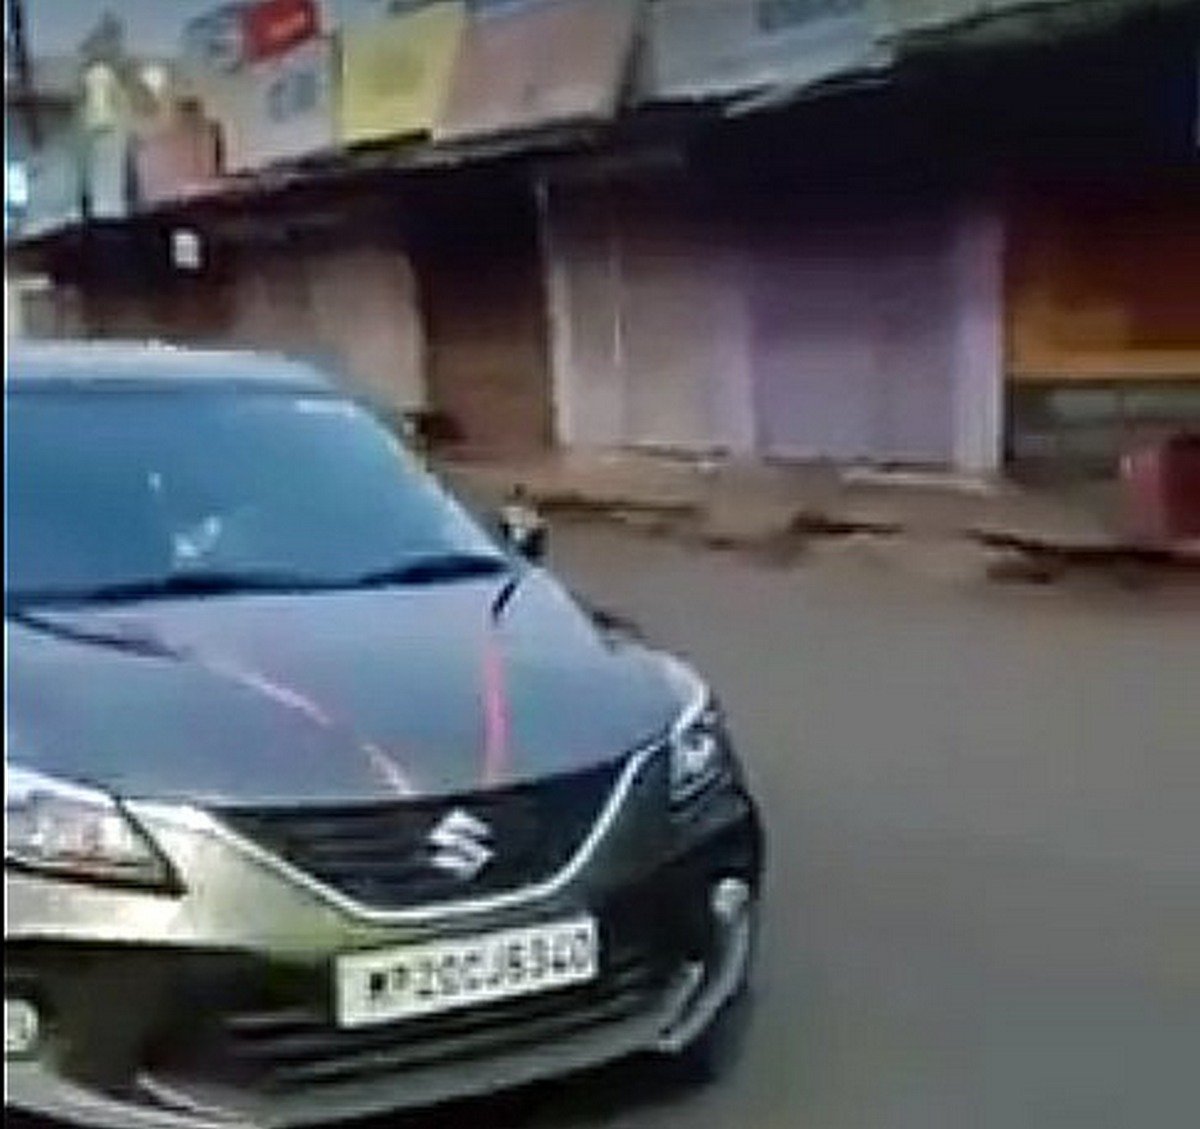 Watch Police Beating Up Maruti Baleno Occupants Out on a Joyride during Lockdown